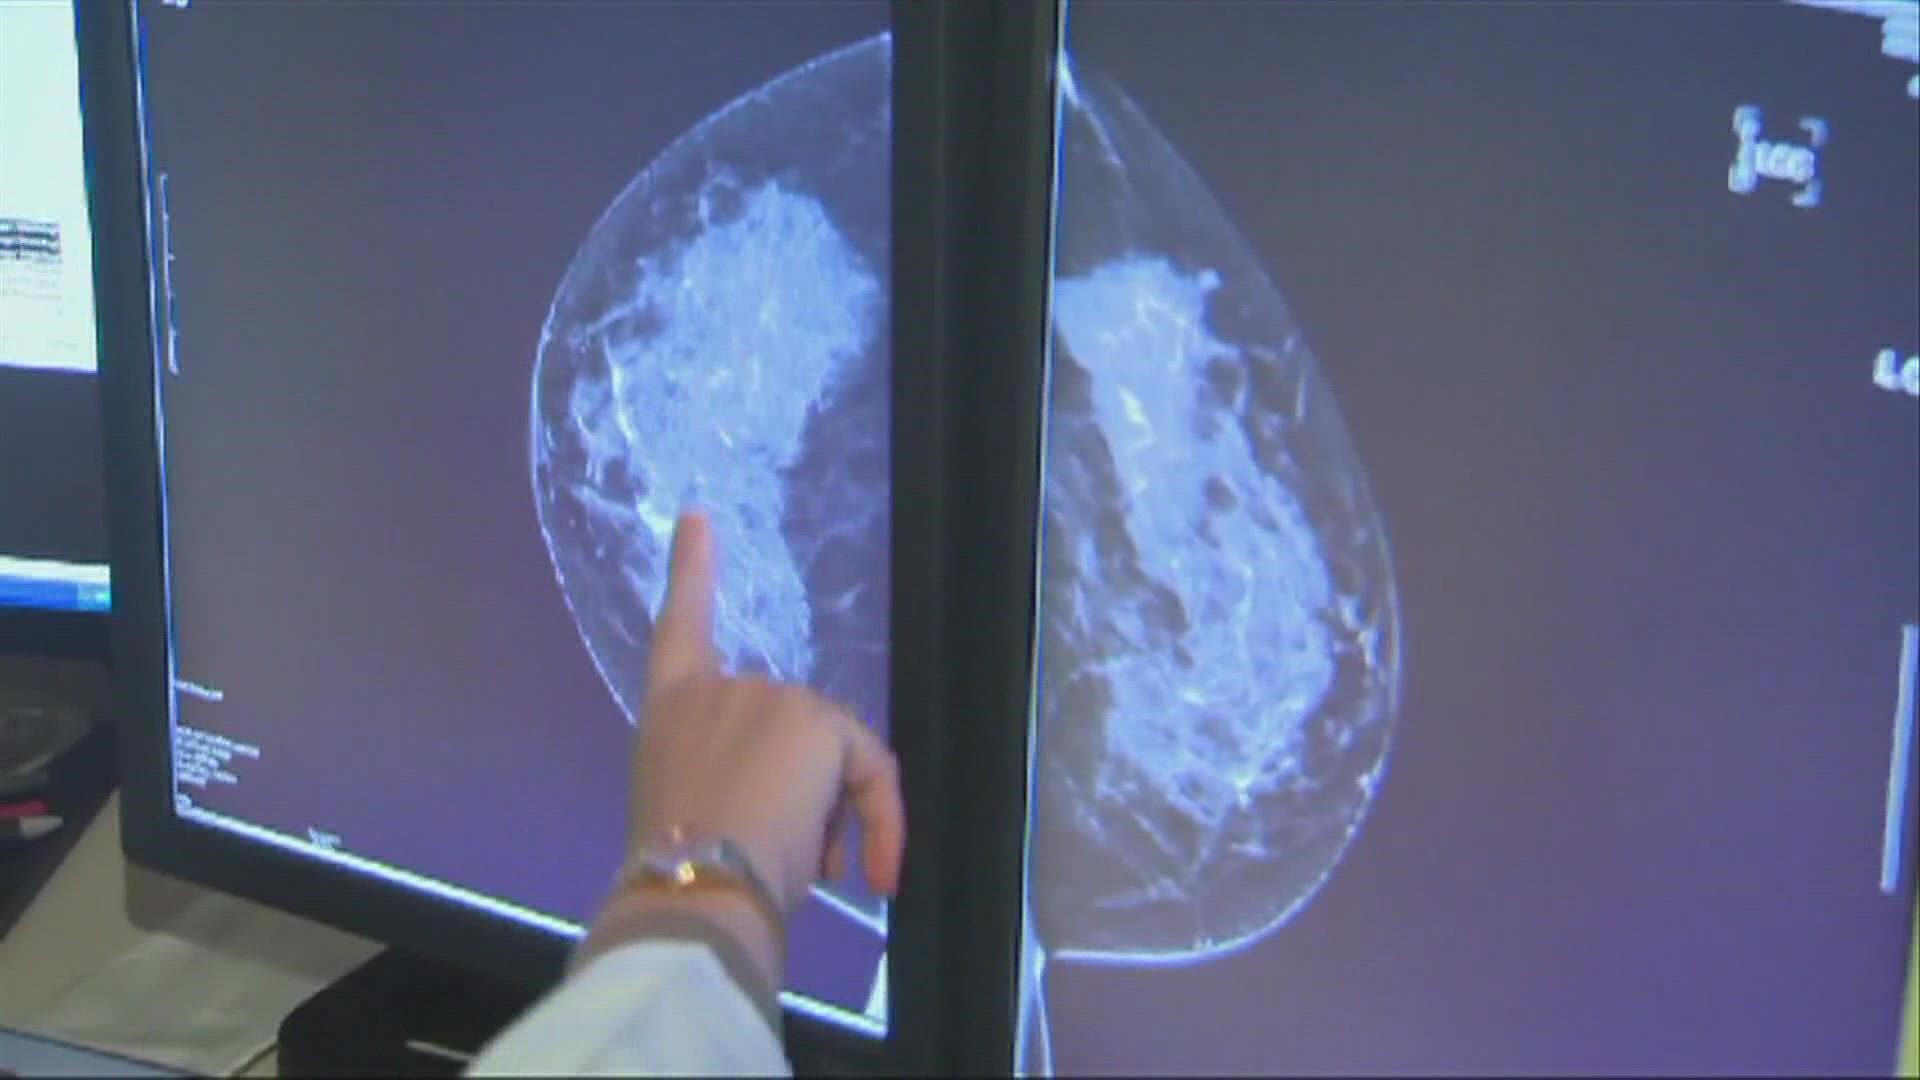 Doctors say in the last two years women put off getting mammograms due to the pandemic. But early detection is key.